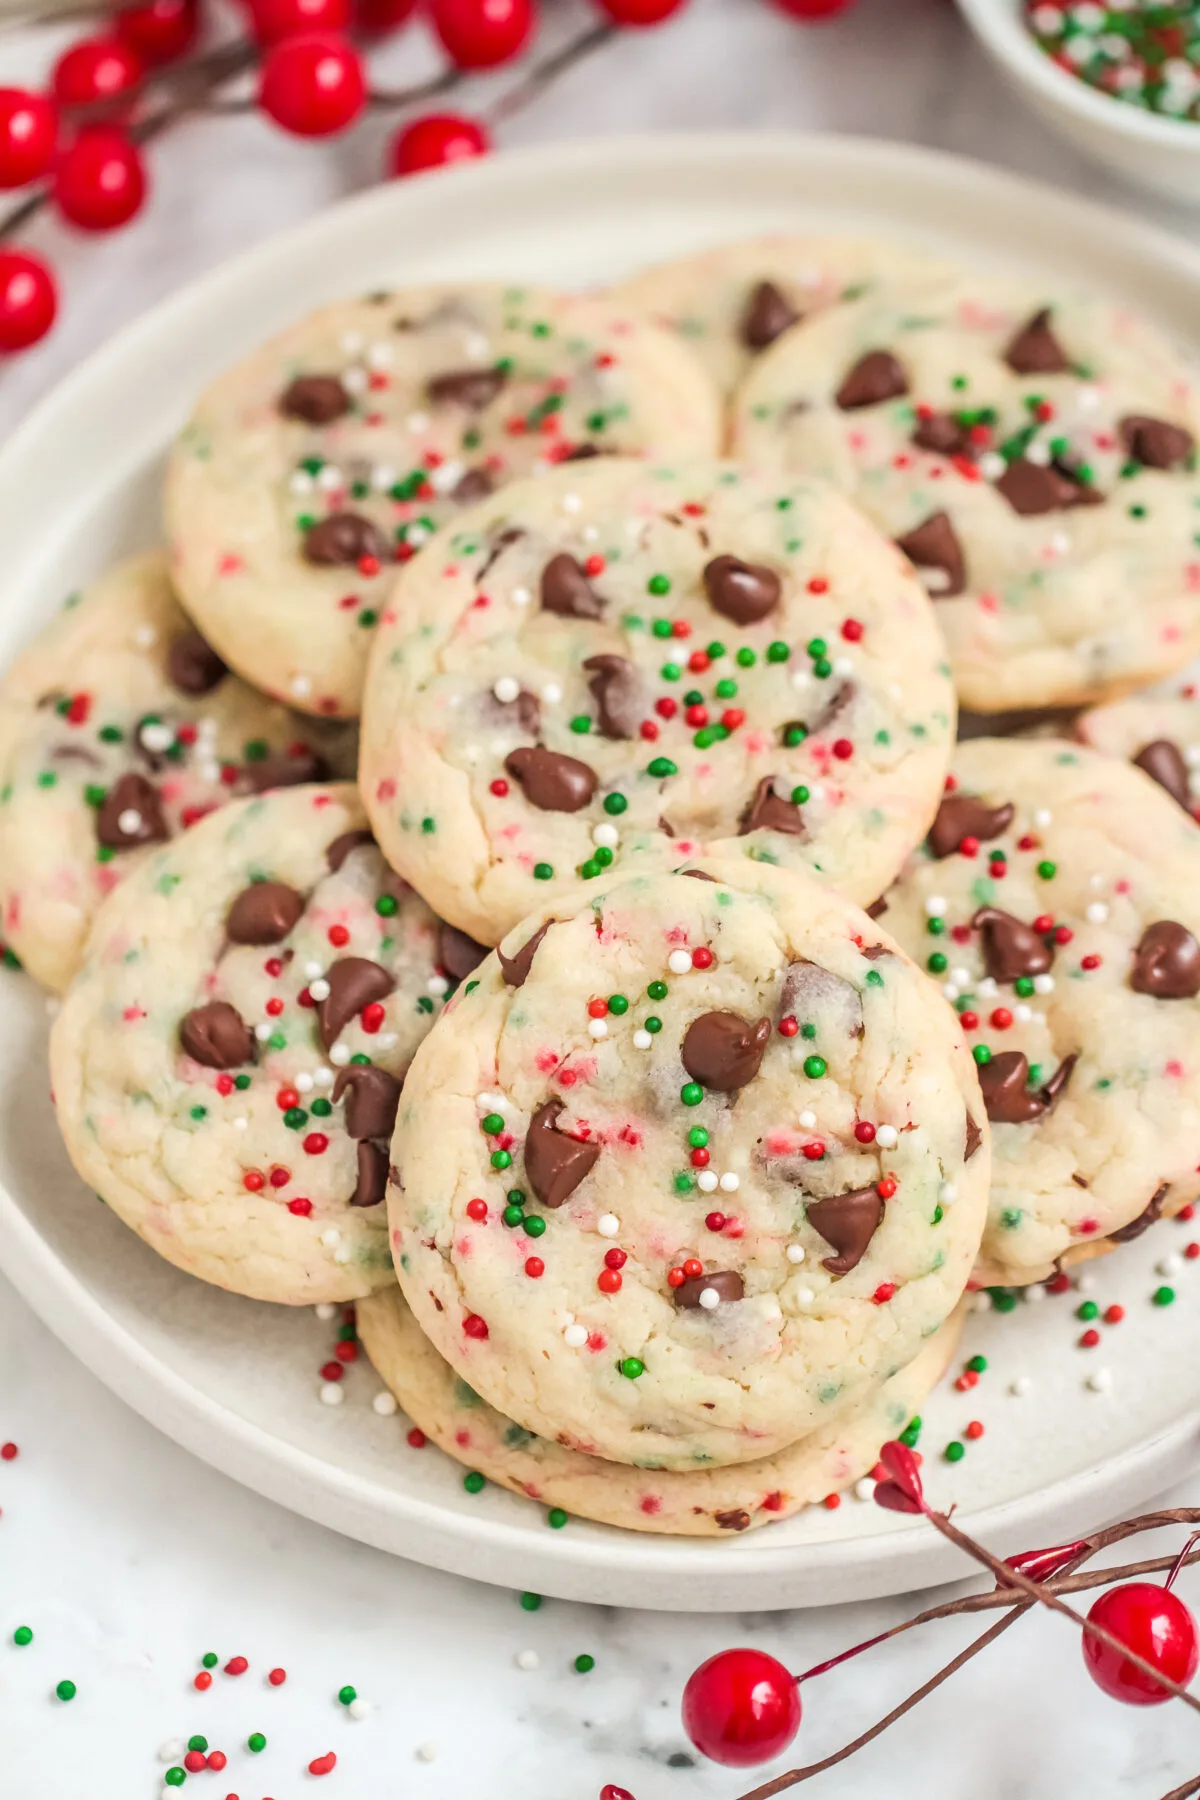 You'll love this easy recipe for Christmas Chocolate Chip Cake Mix Cookies! Only a few ingredients are needed to make soft festive cookies.